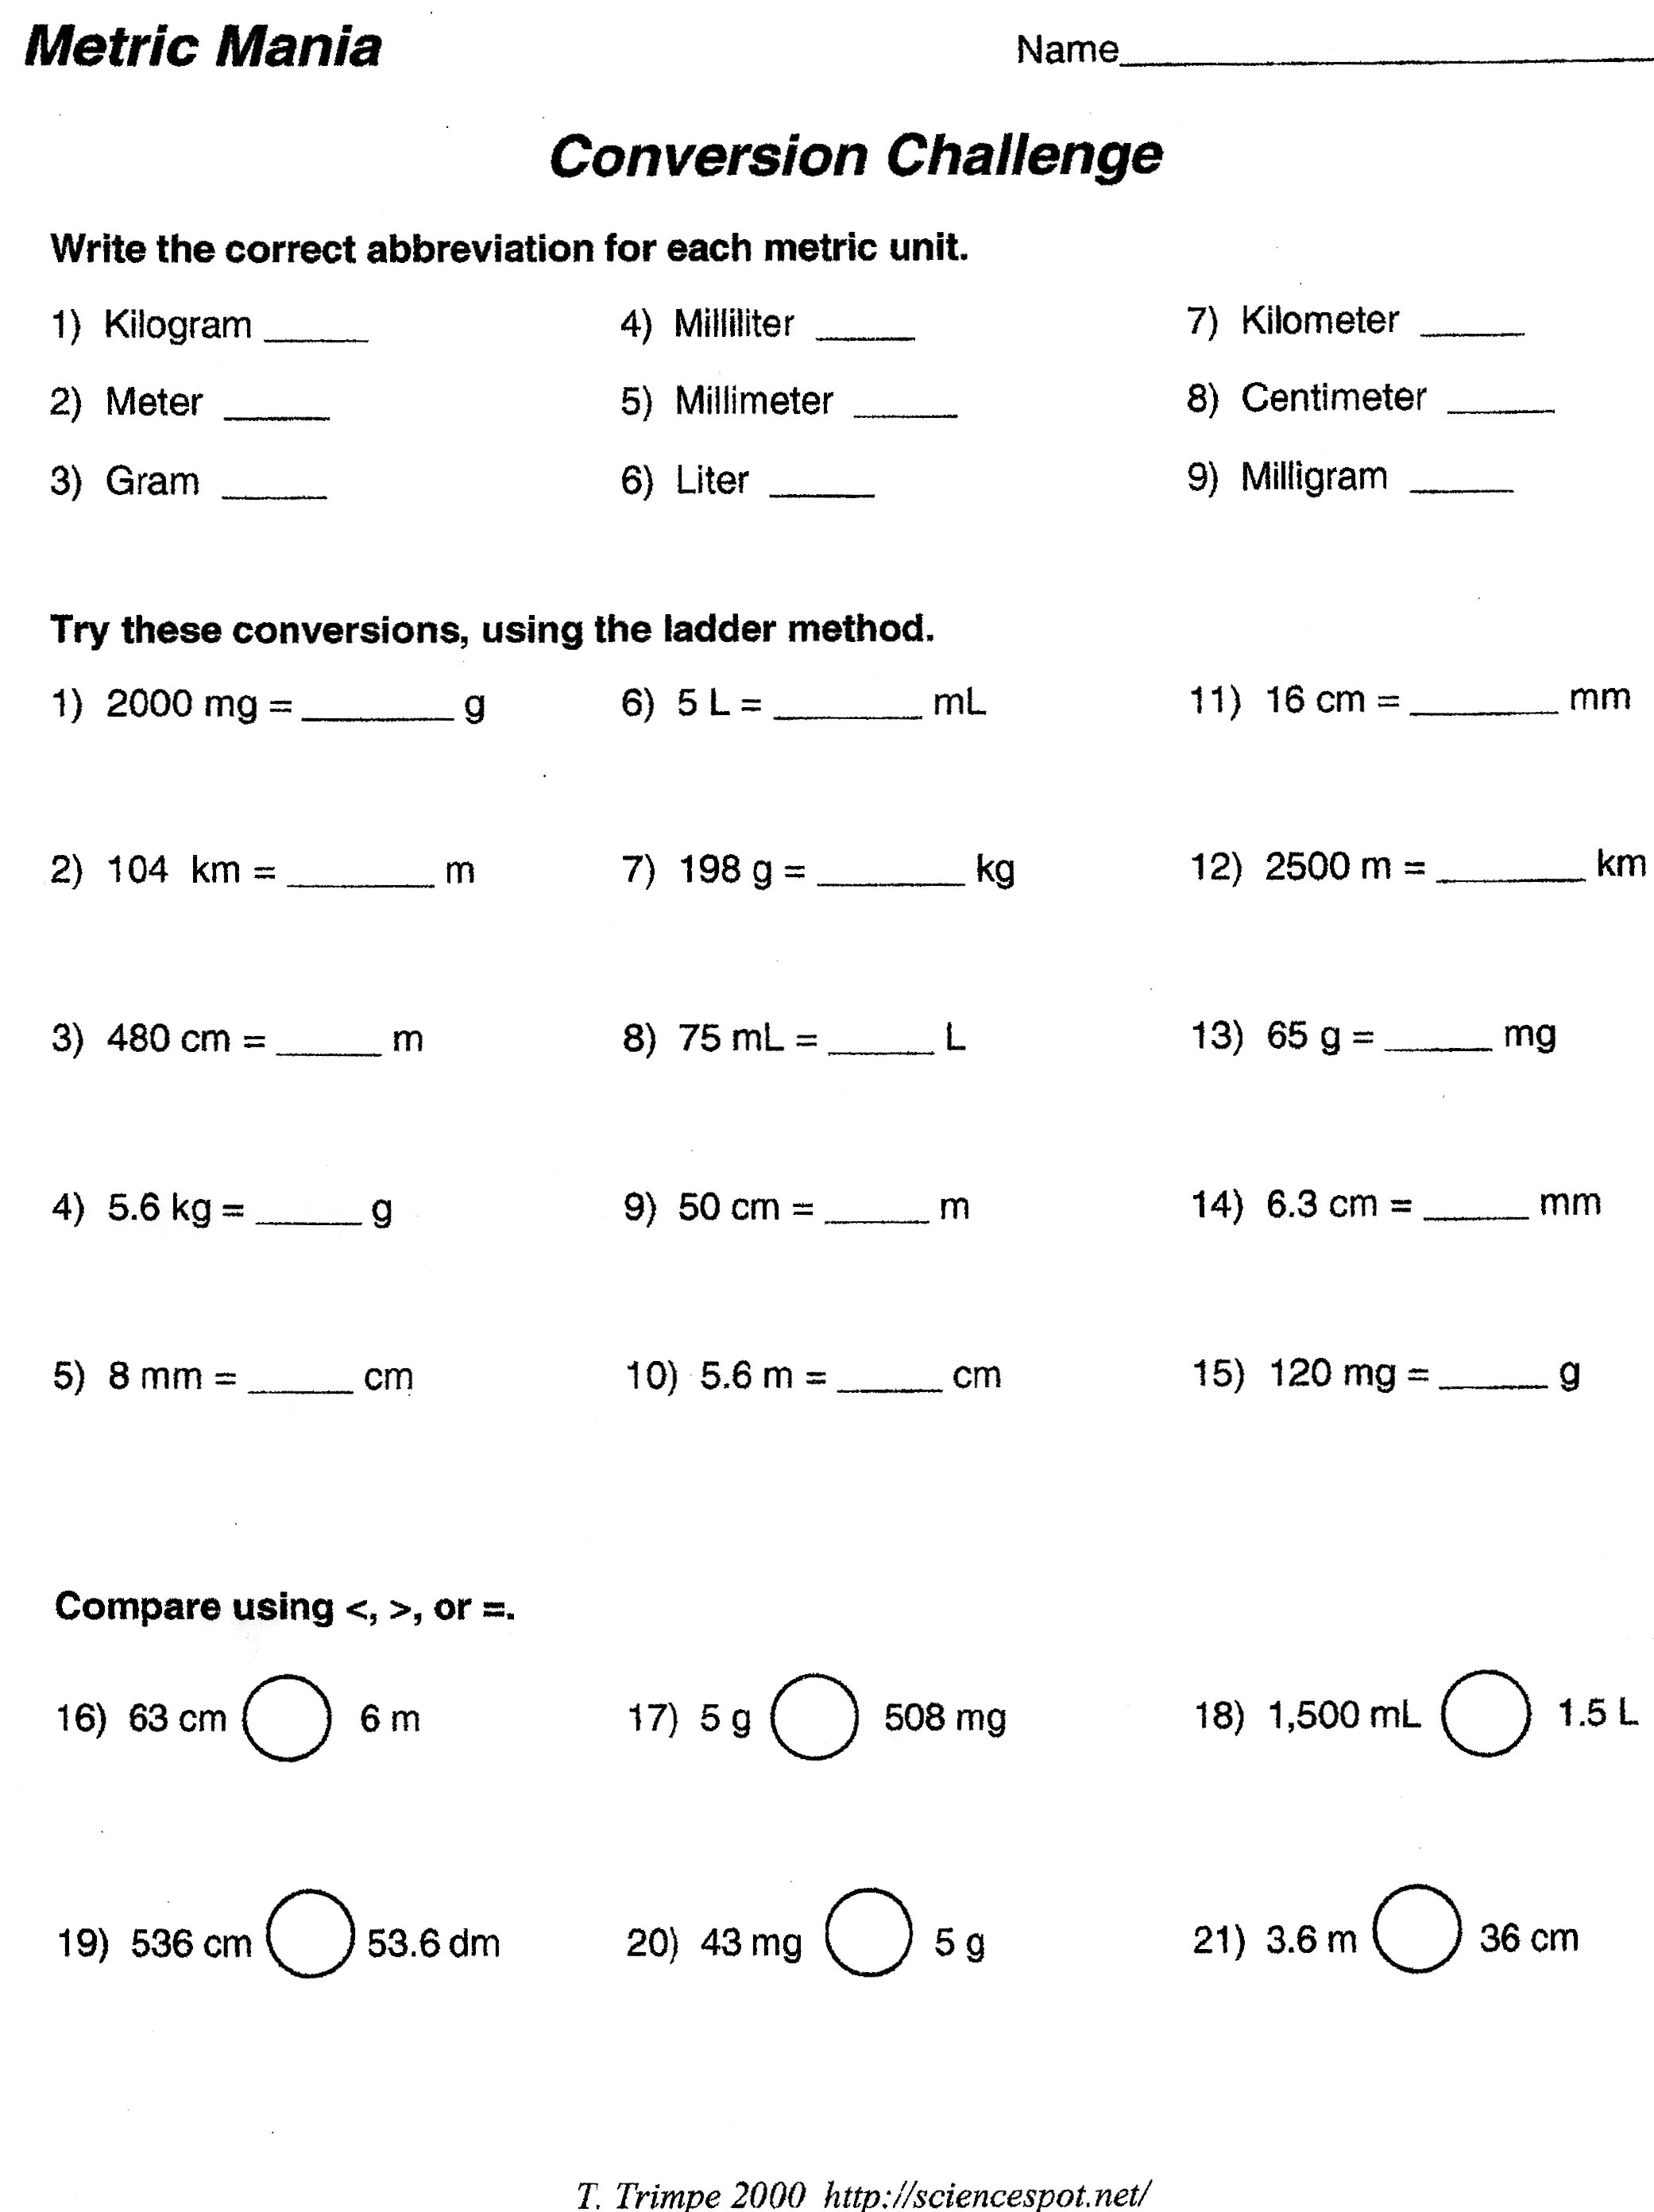 16 Best Images of Science Metric Conversion Worksheet  Metric System Conversion Worksheet 